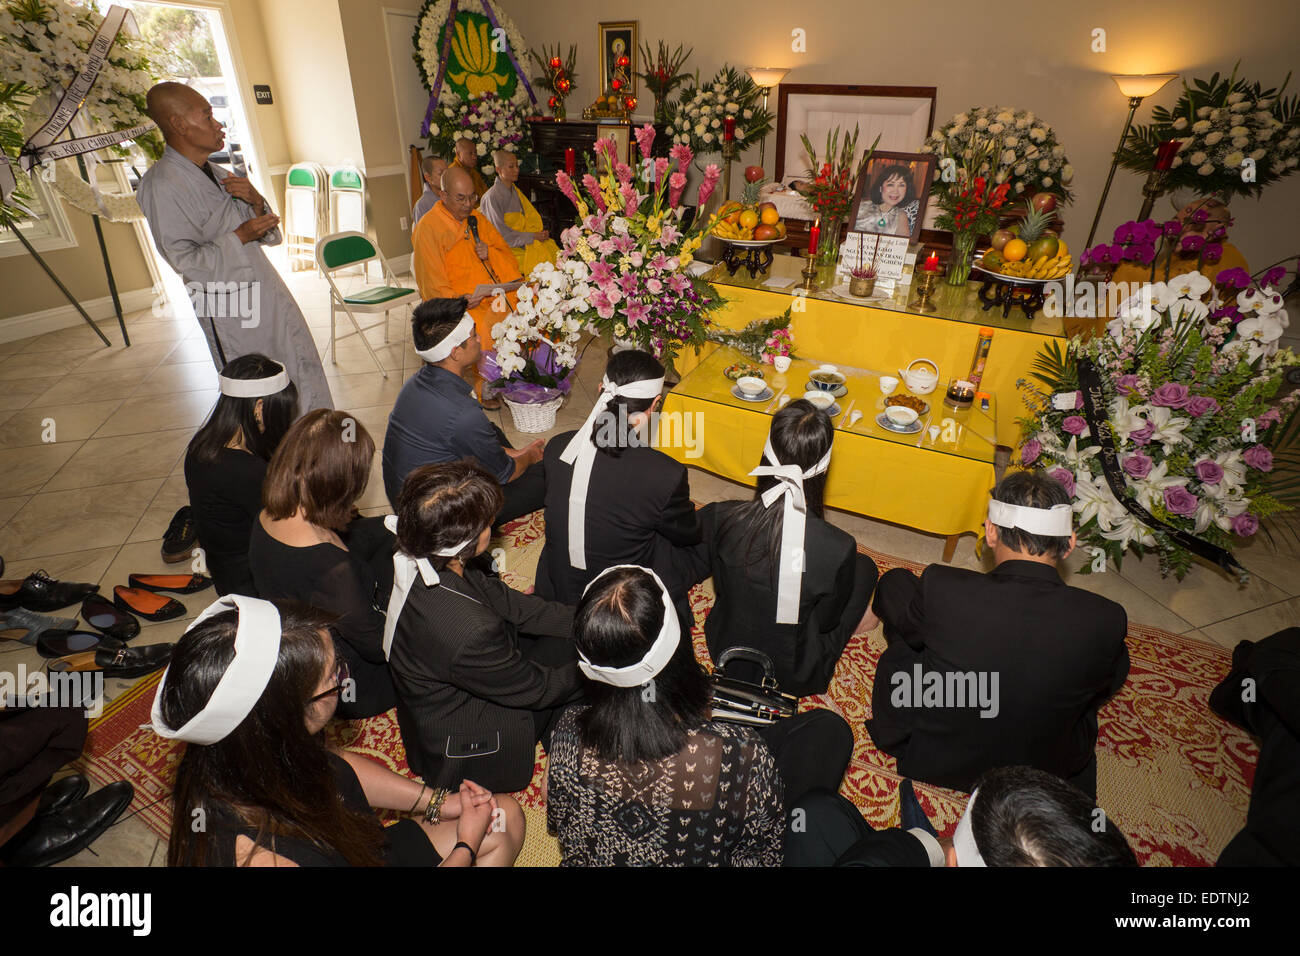 Family members, mourners at Vietnamese funeral service, Little Saigon district, city of Westminster, Orange County, California Stock Photo